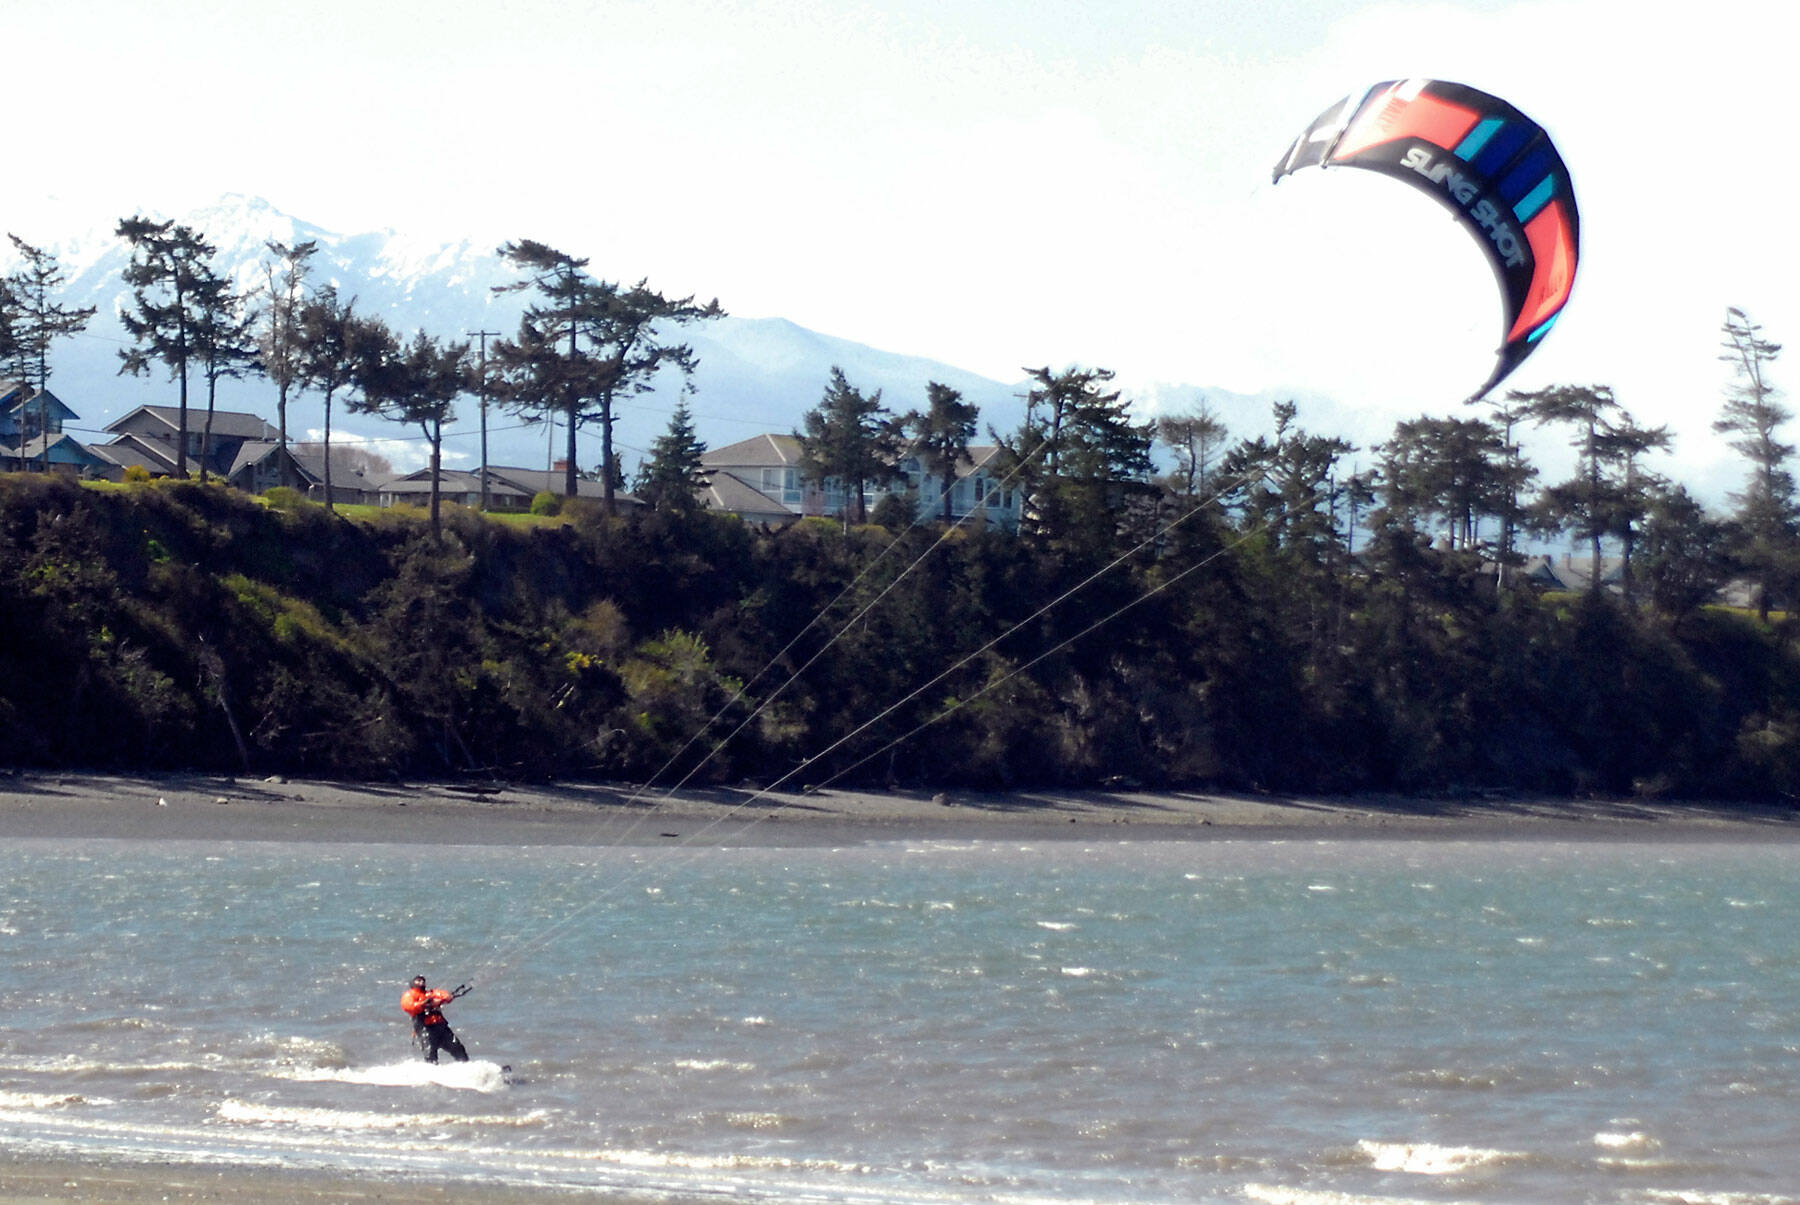 Barney Lund of Kent takes to the water off Dungeness Bay with his kite board on a blustery Tuesday north of Sequim. Stiff westerly breezes prompted Lund to try his hand at harnessing the wind, he said. (Keith Thorpe/Peninsula Daily News)